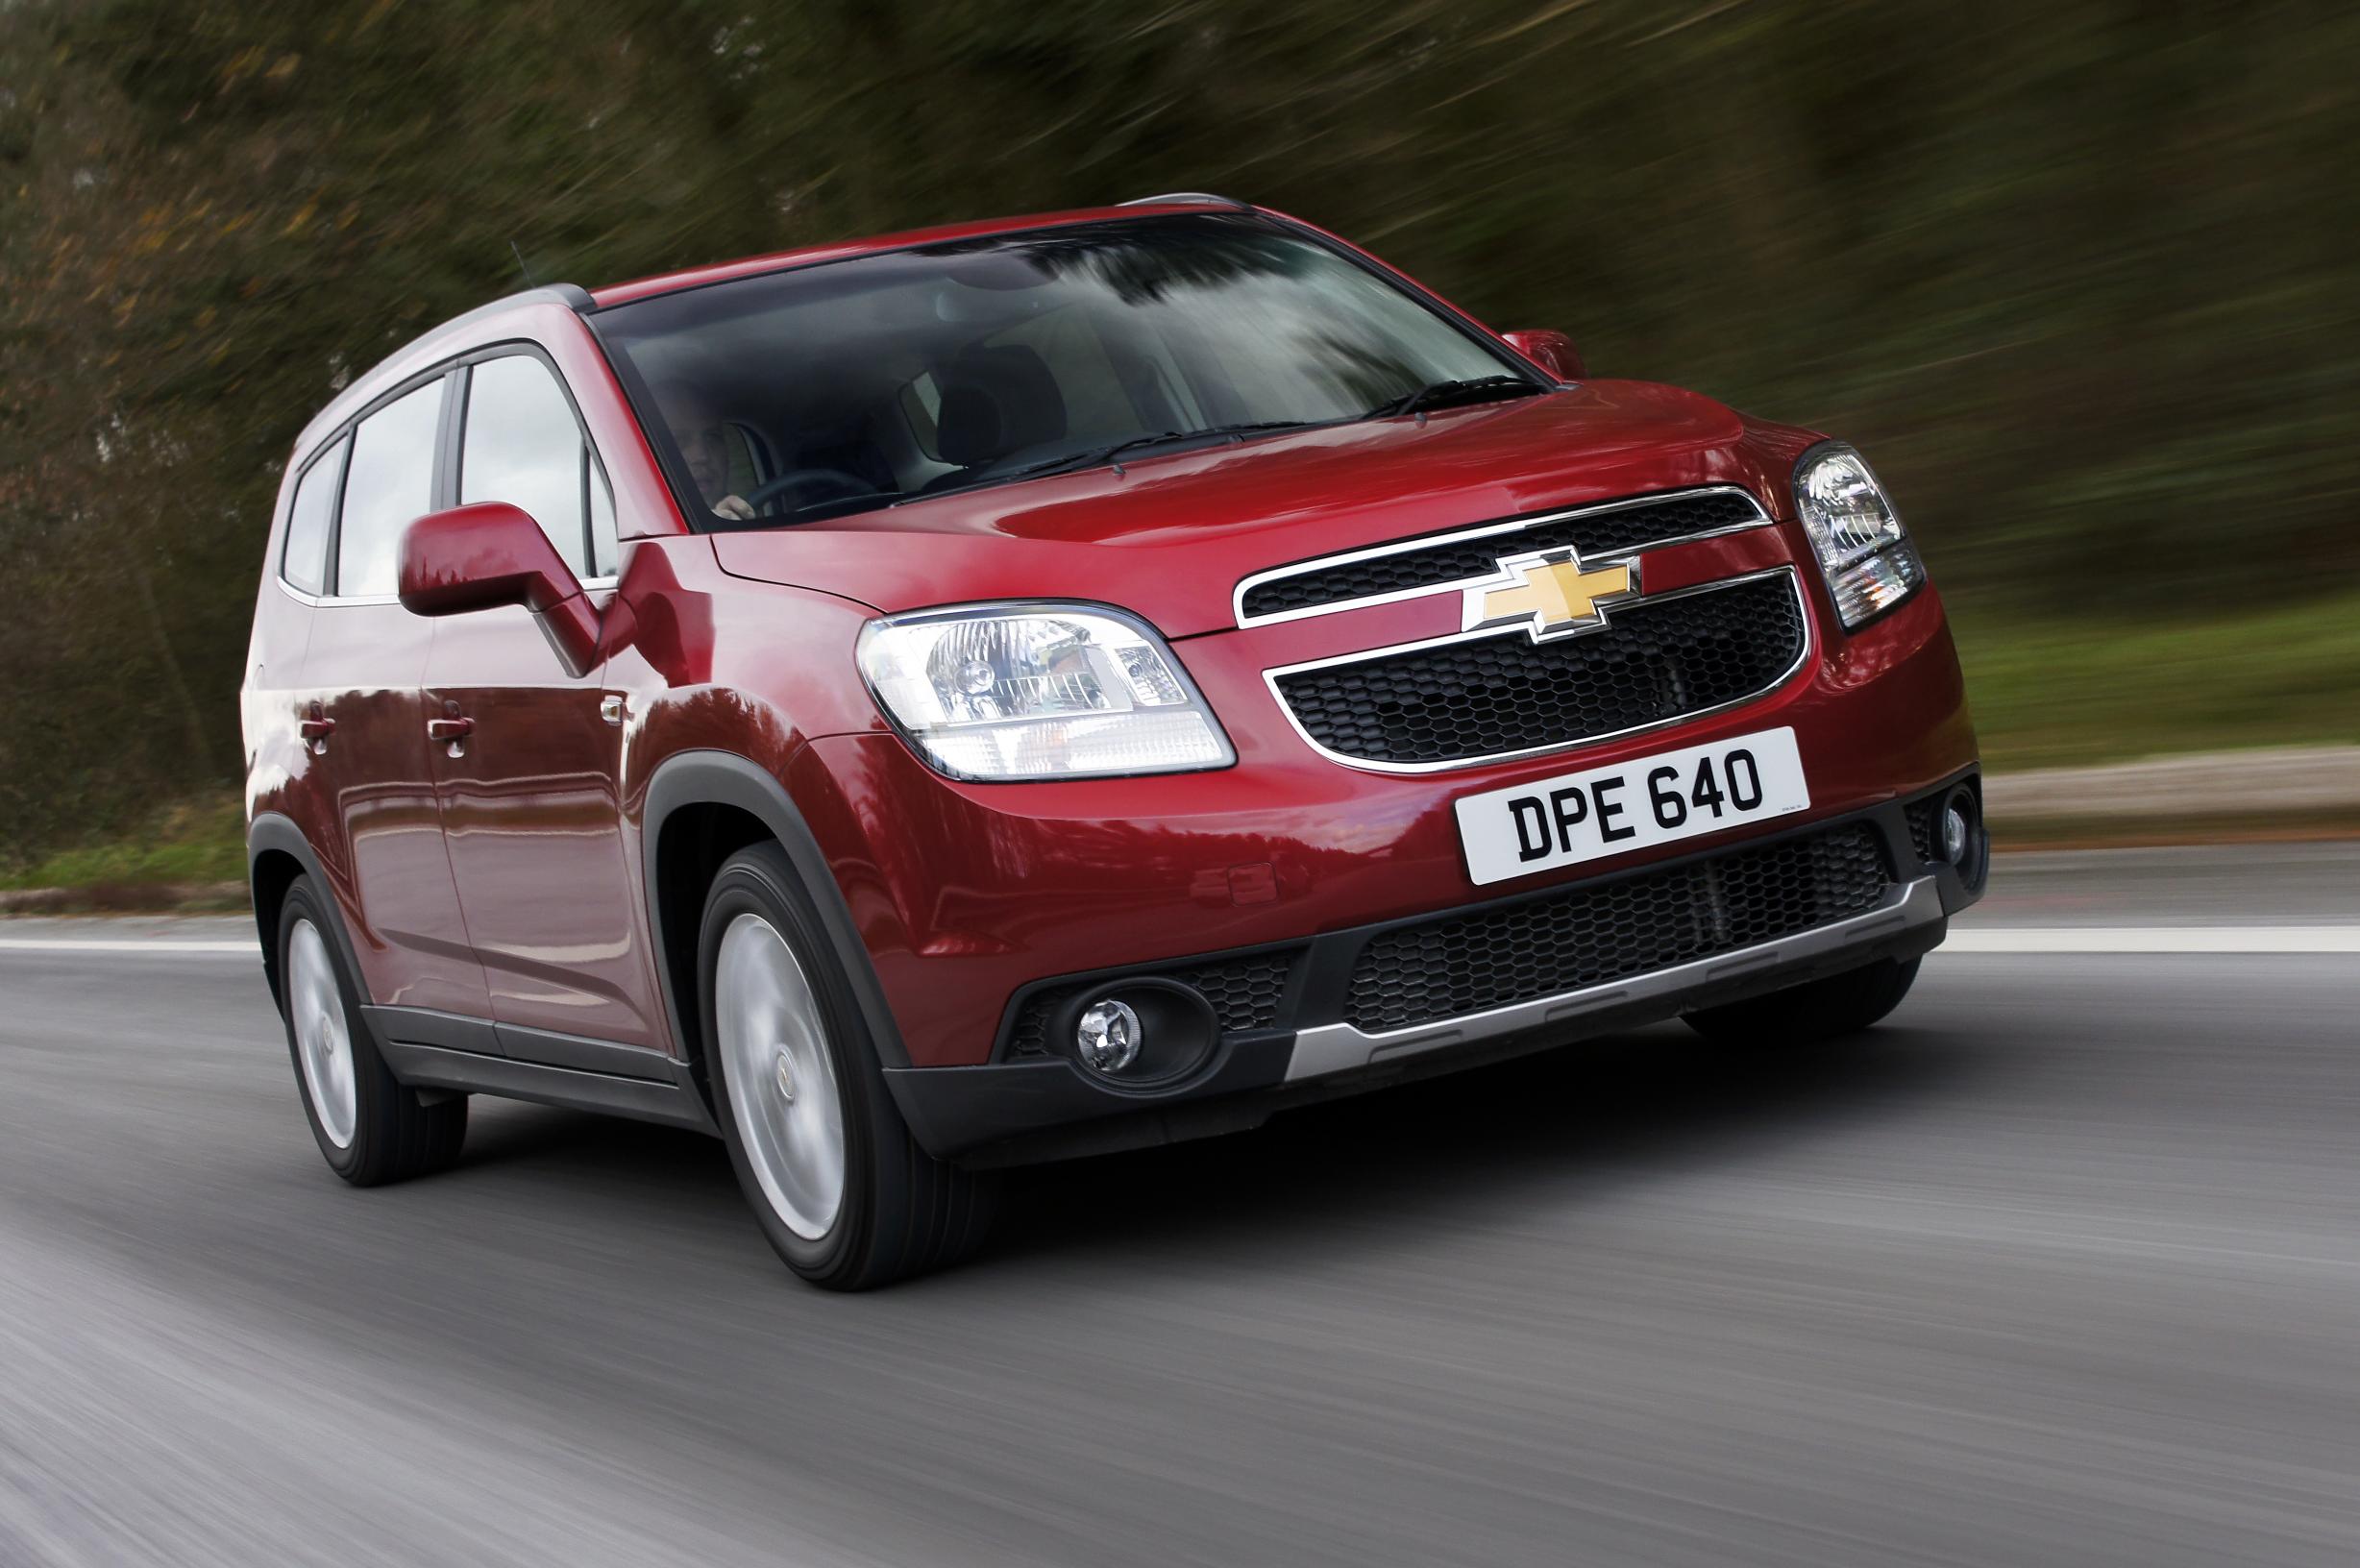 Spacey and Brilliant Value The Chevrolet Orlando Review